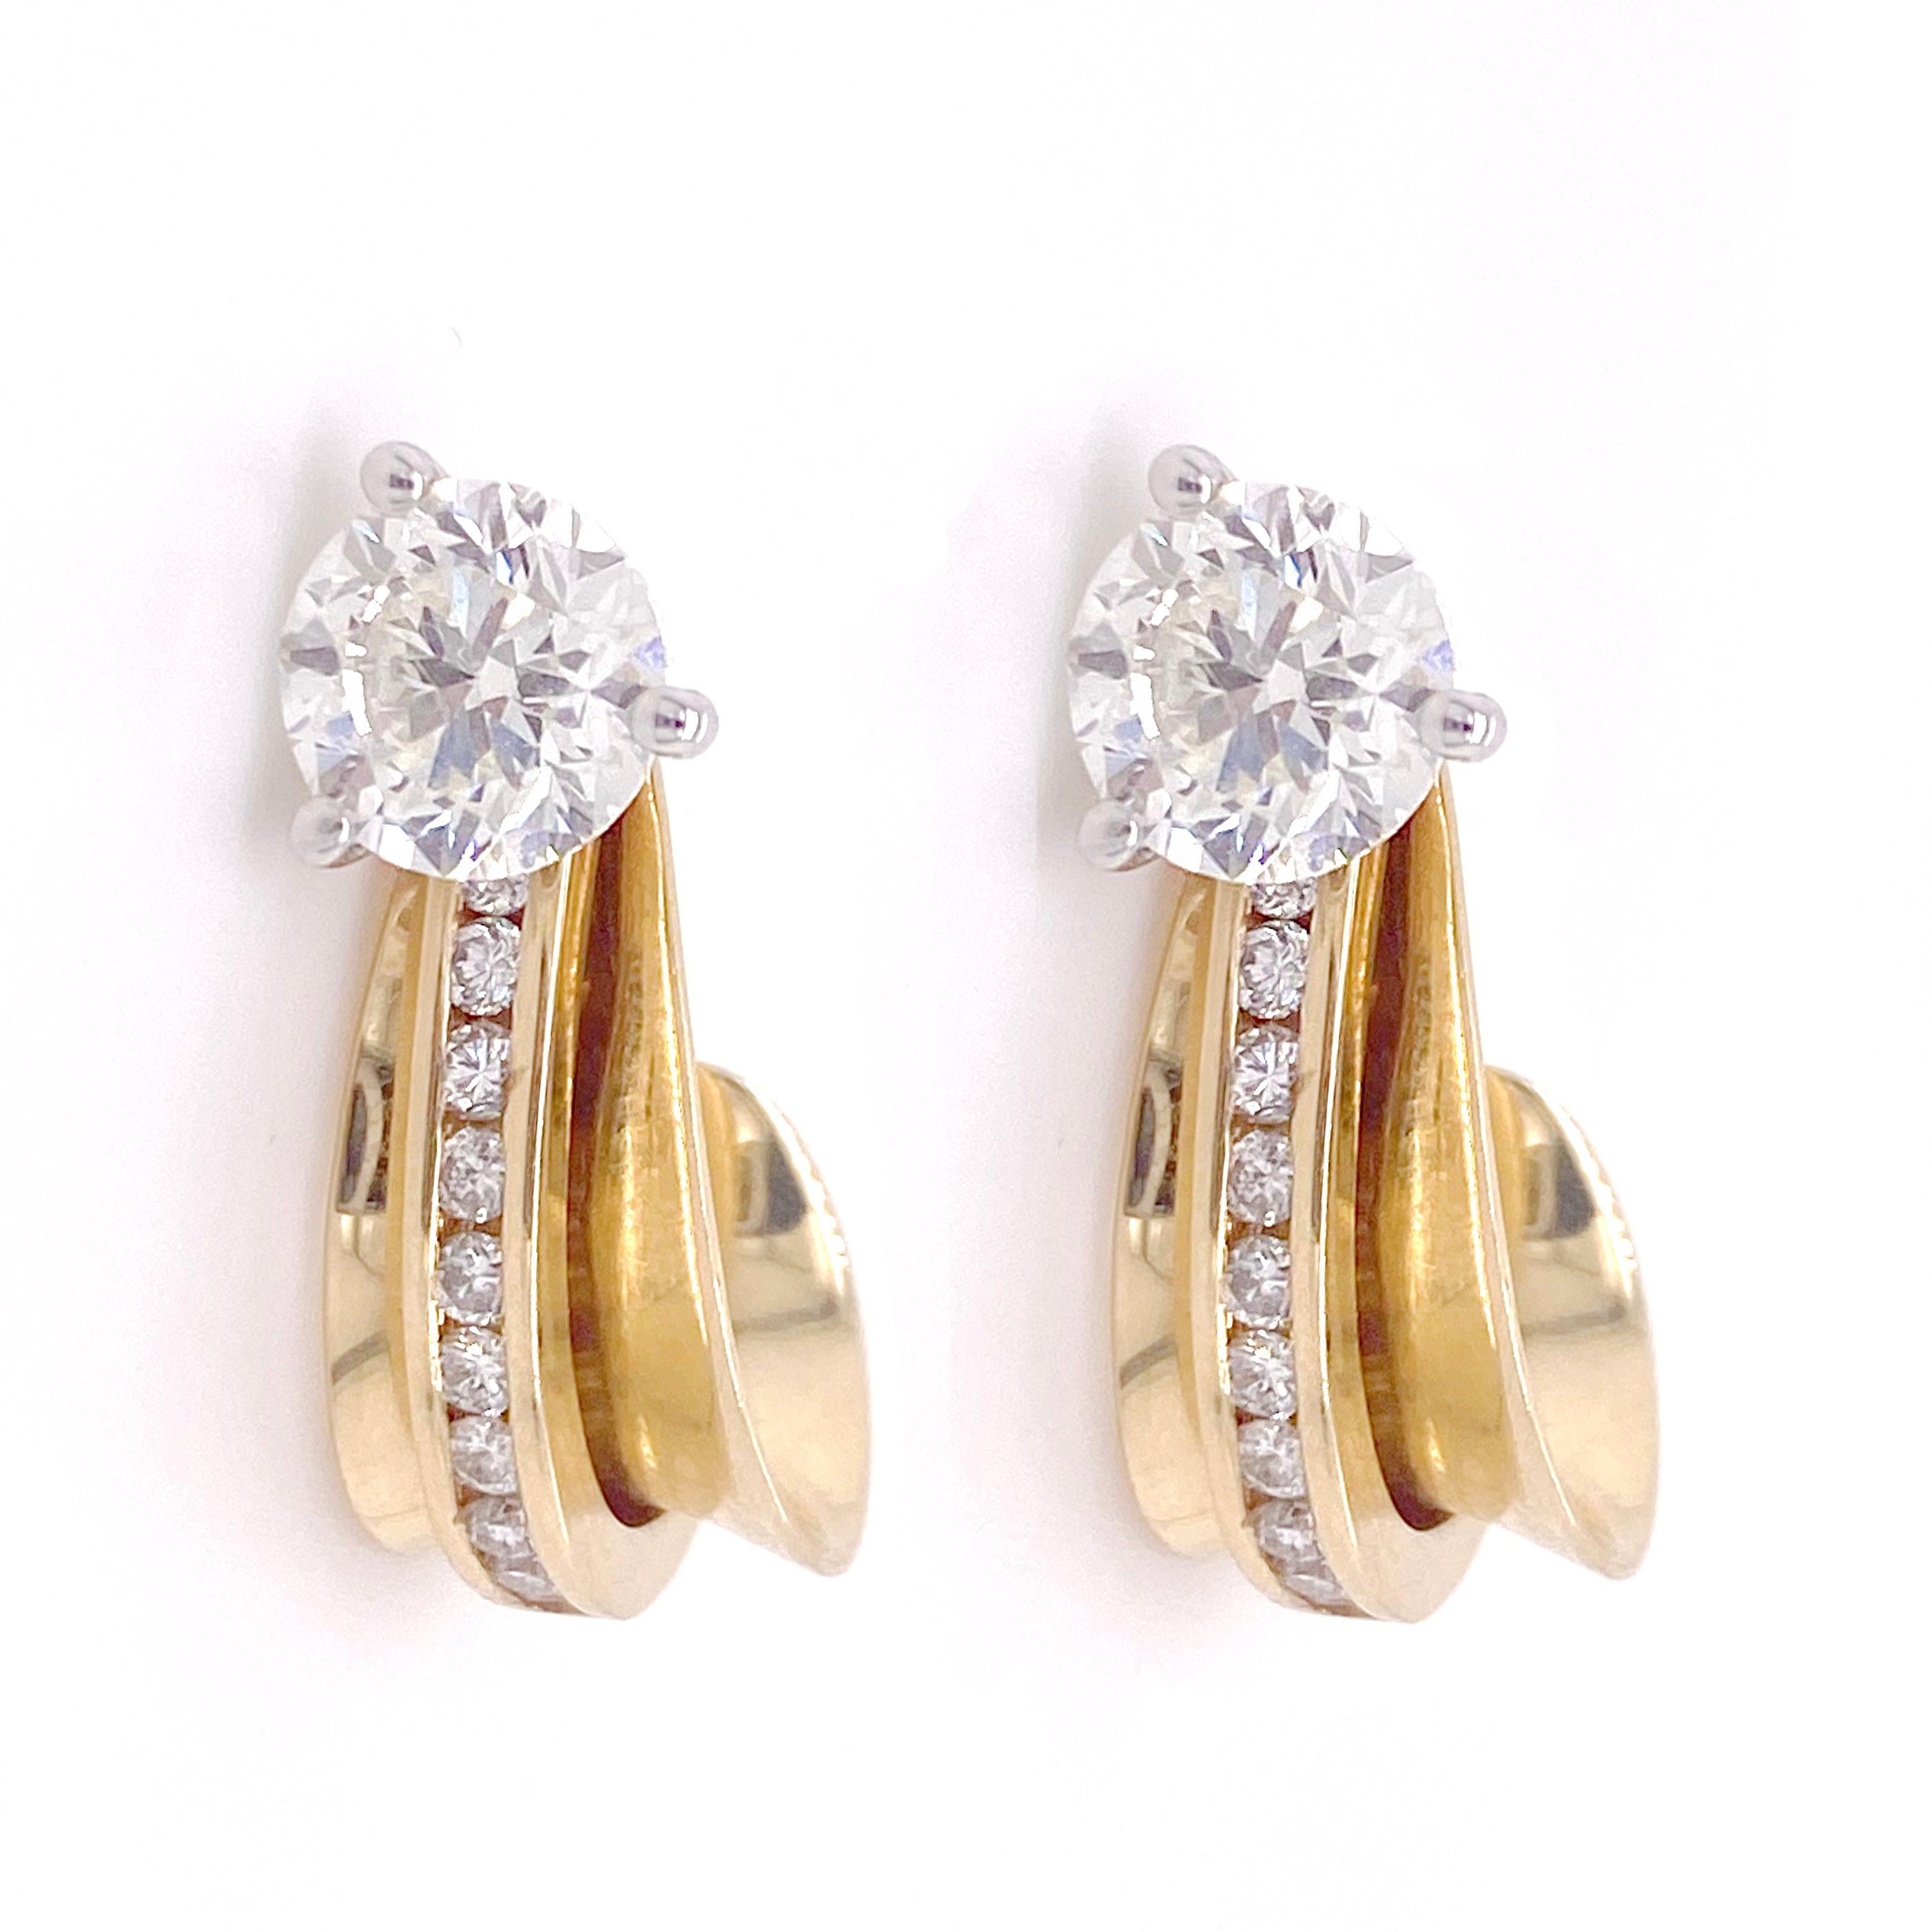 These custom made earring jackets have three different ways to wear them. One way is with diamond jacket attached to the gold earring jacket hoop with any stud earring. Secondly, the diamond earrings can be worn alone with a stud earring.  Thirdly,